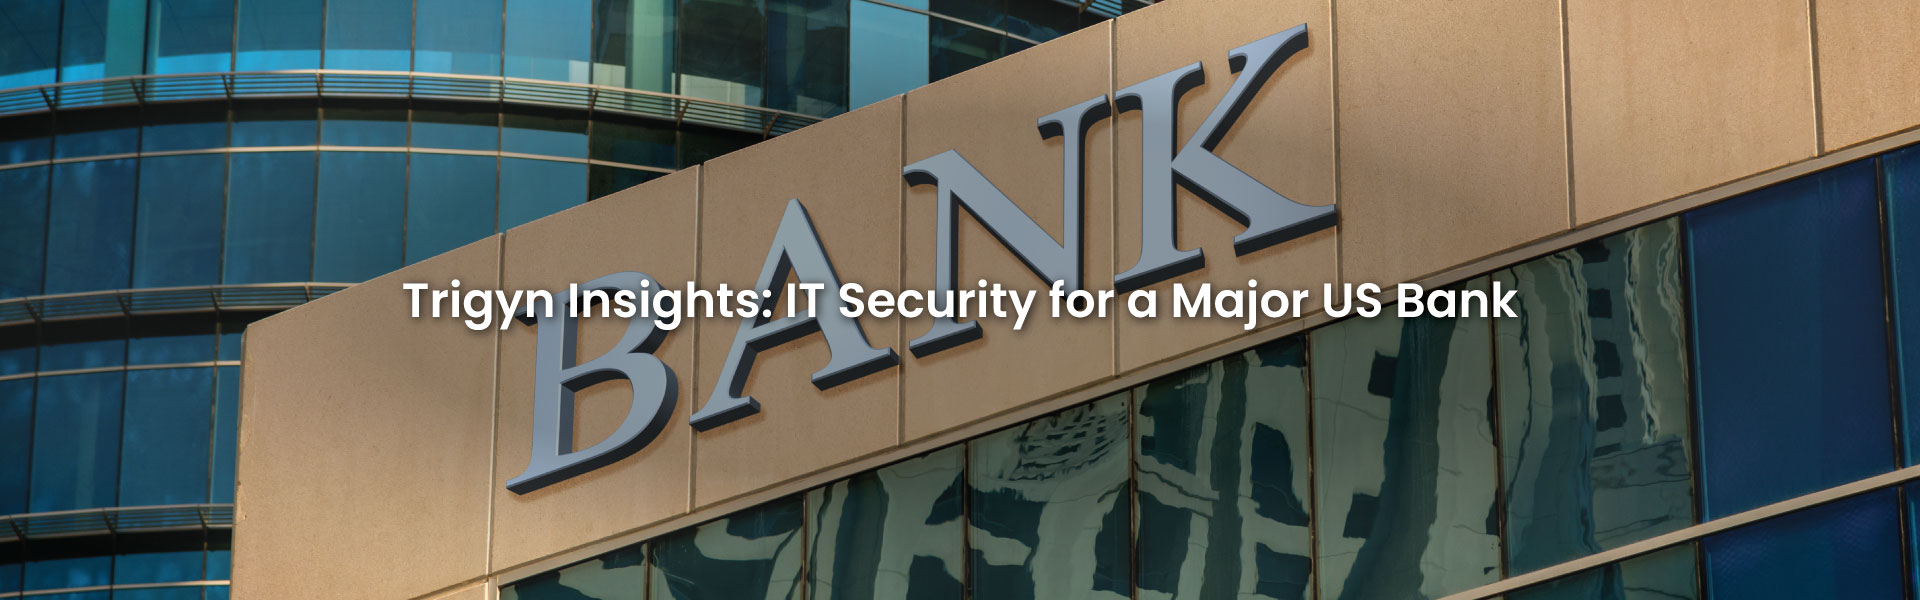 Case Study IT Security for a Major US Bank